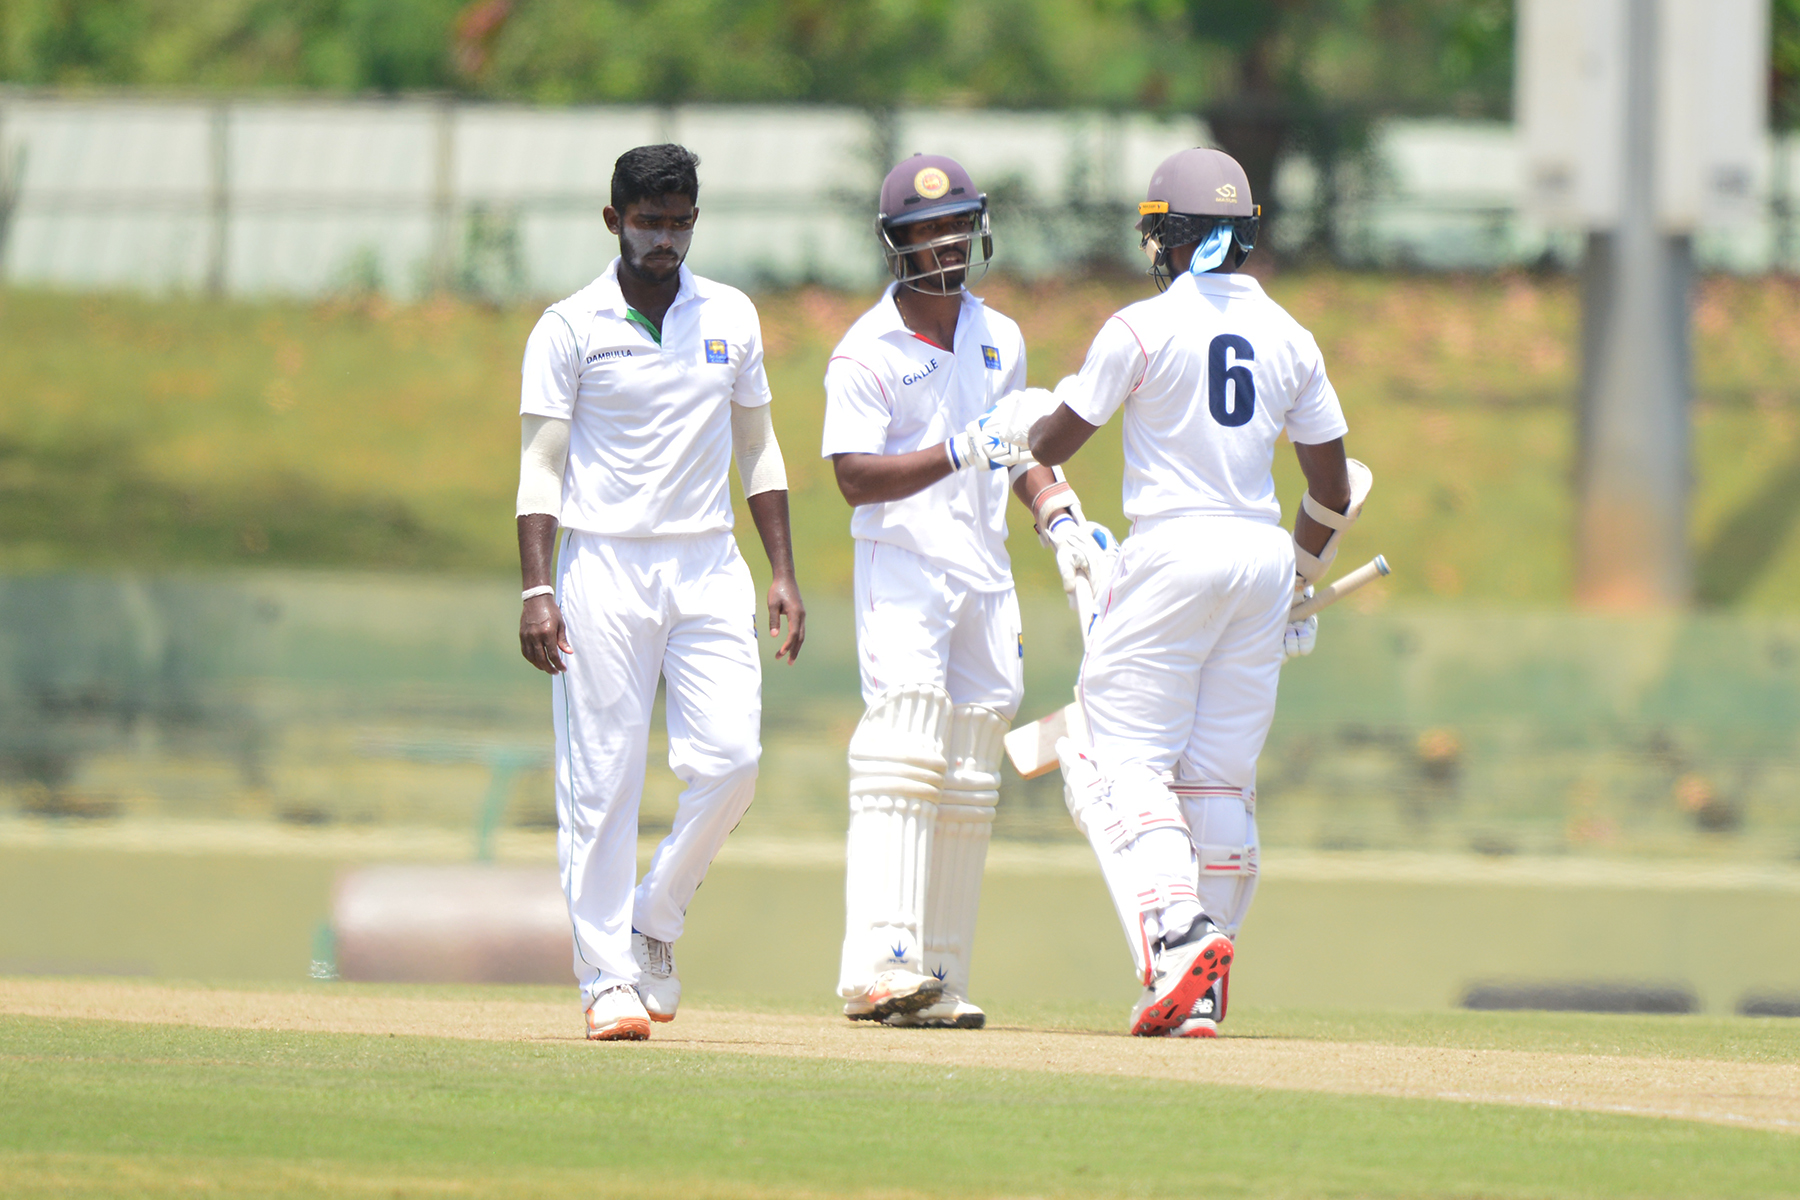 Sangeeth Cooray 160, Pabasara Waduge 108 flay Jaffna attack in record 208 stand – Galle 444/9 decl.